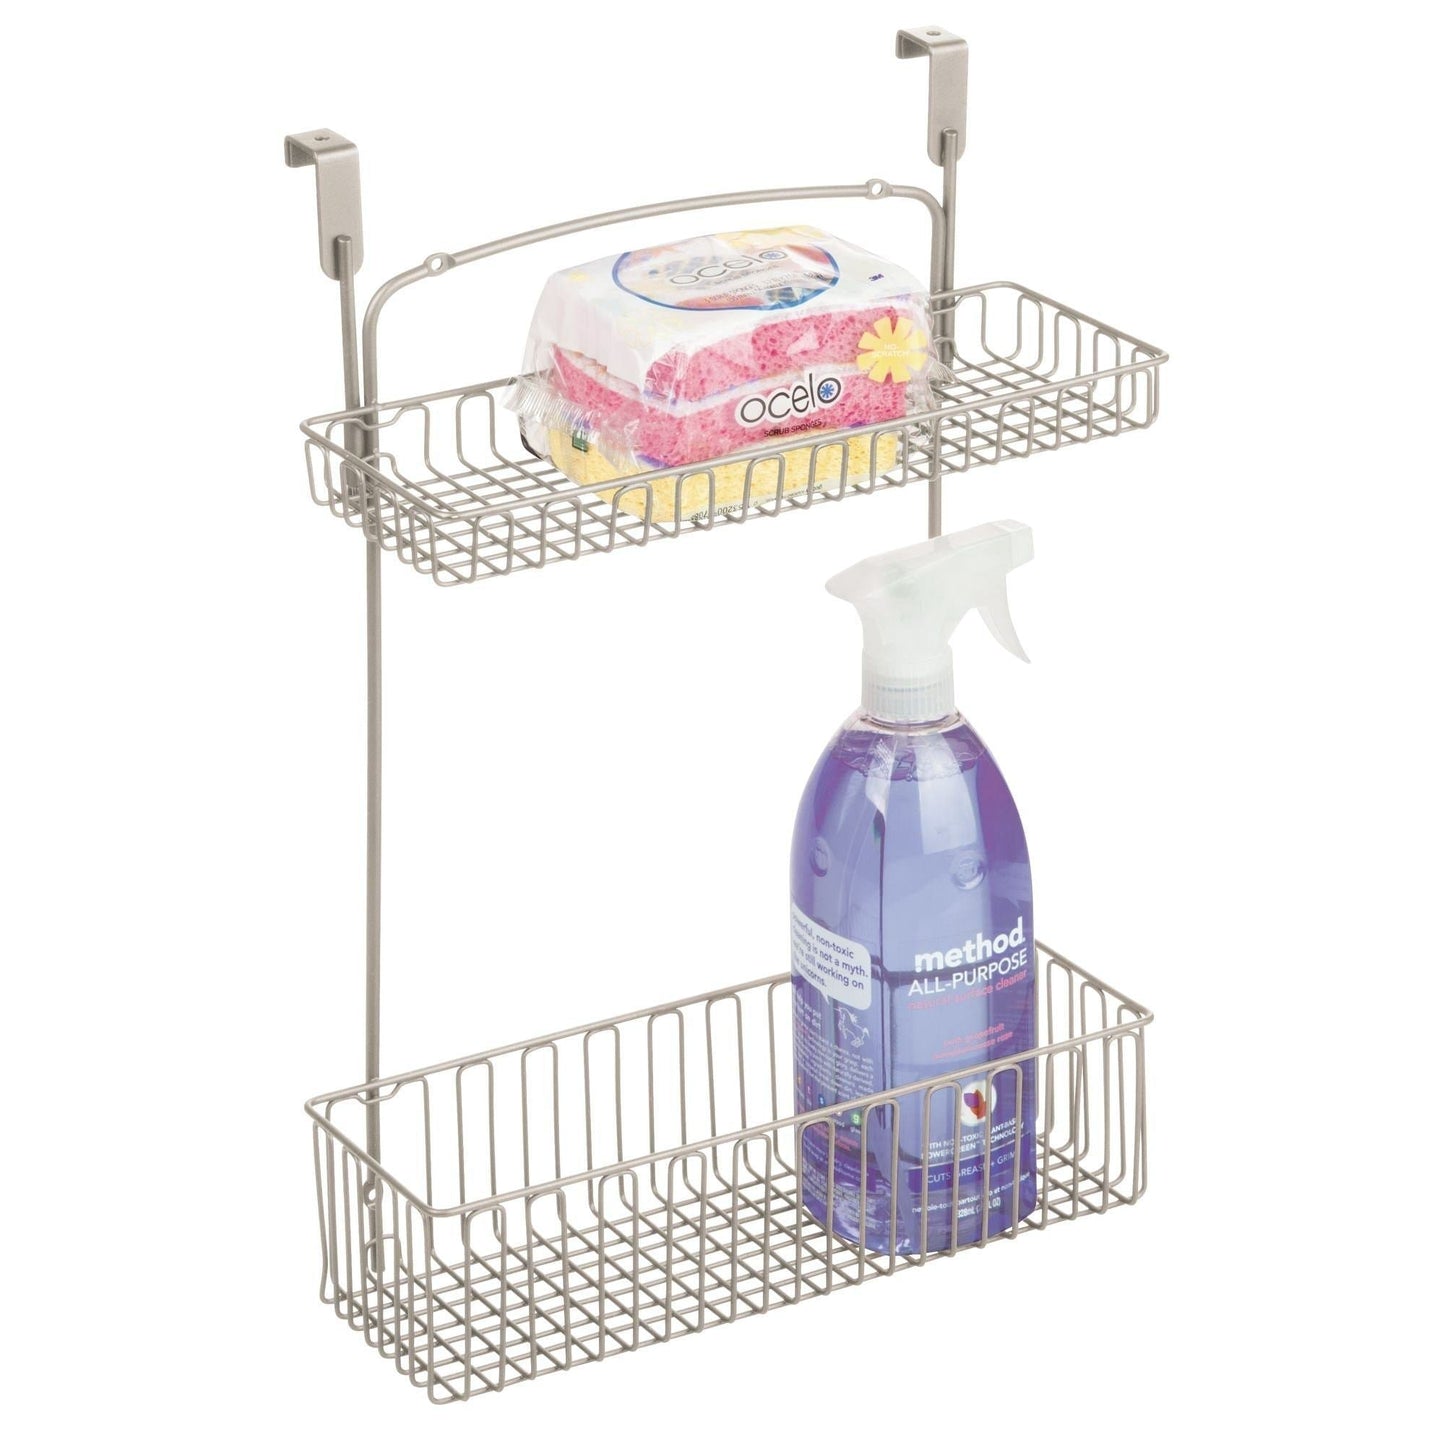 Order now metal farmhouse over cabinet kitchen storage organizer holder or basket hang over cabinet doors in kitchen pantry holds dish soap window cleaner sponges satin